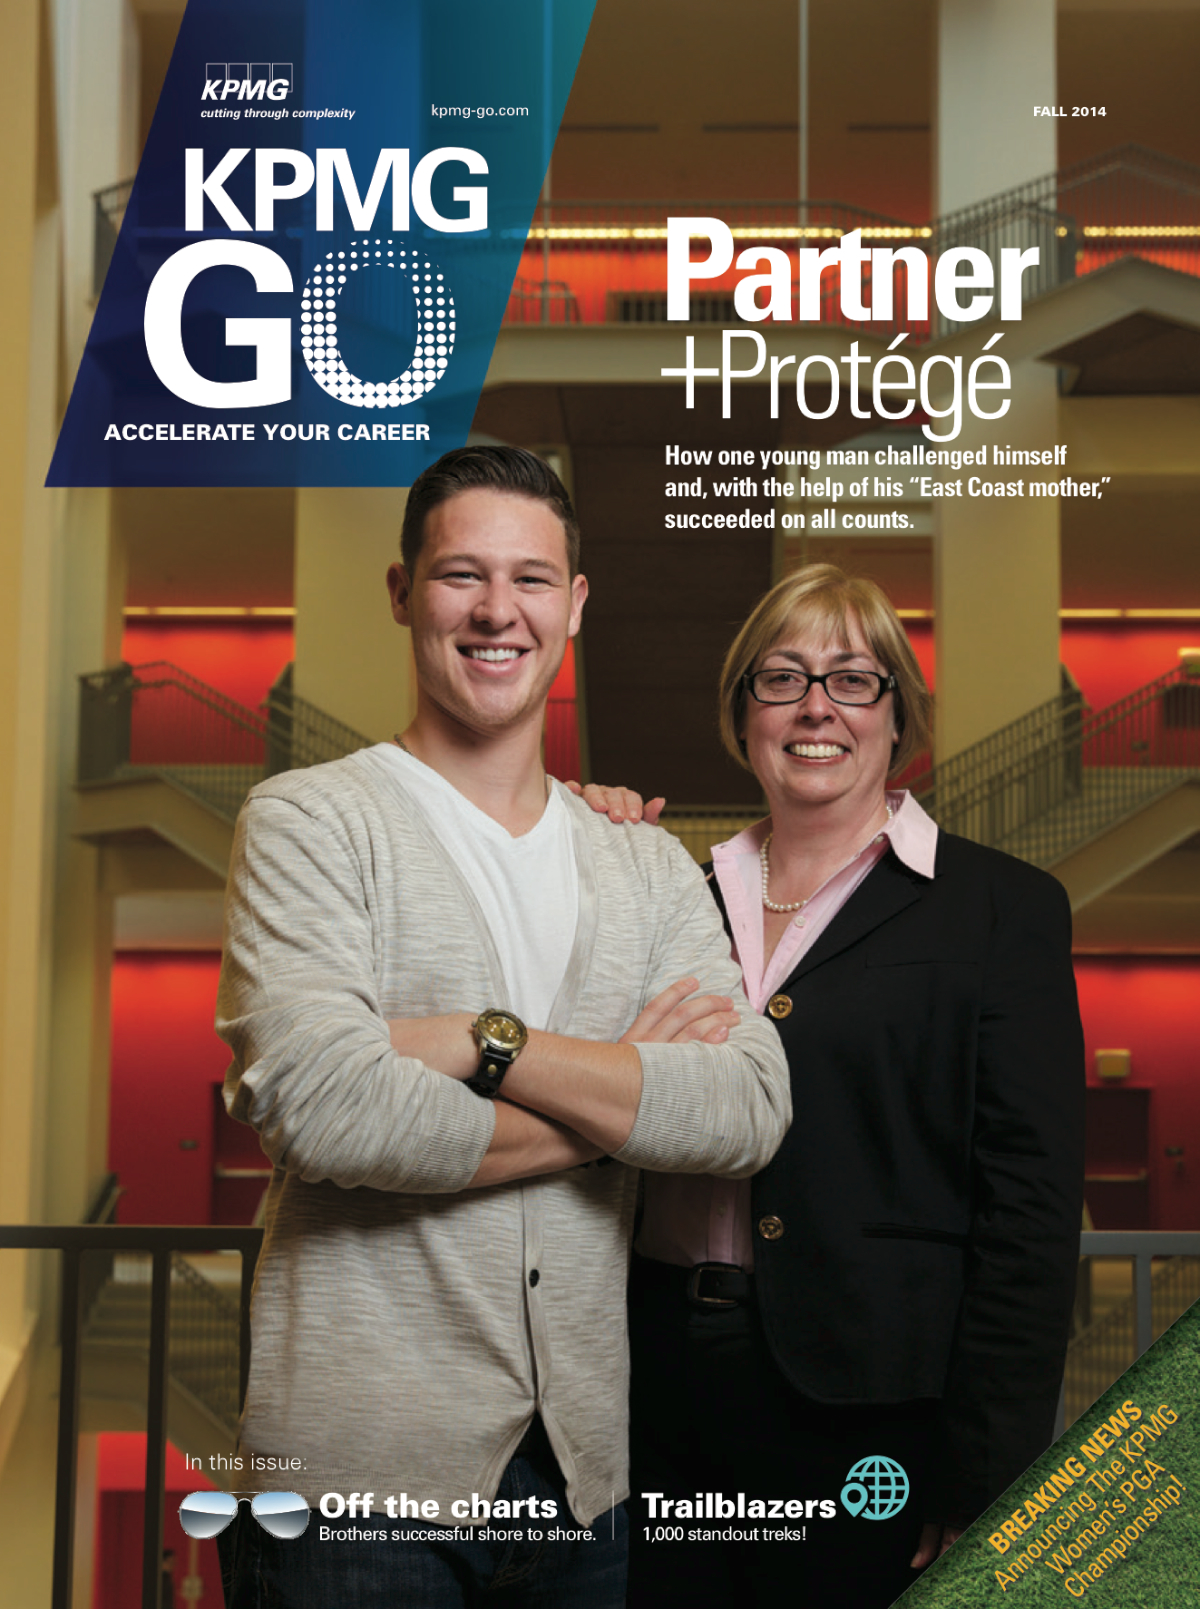 KPMG Go, Fall 2014 cover with Skyler Logsdon and Patricia Boshuizen.